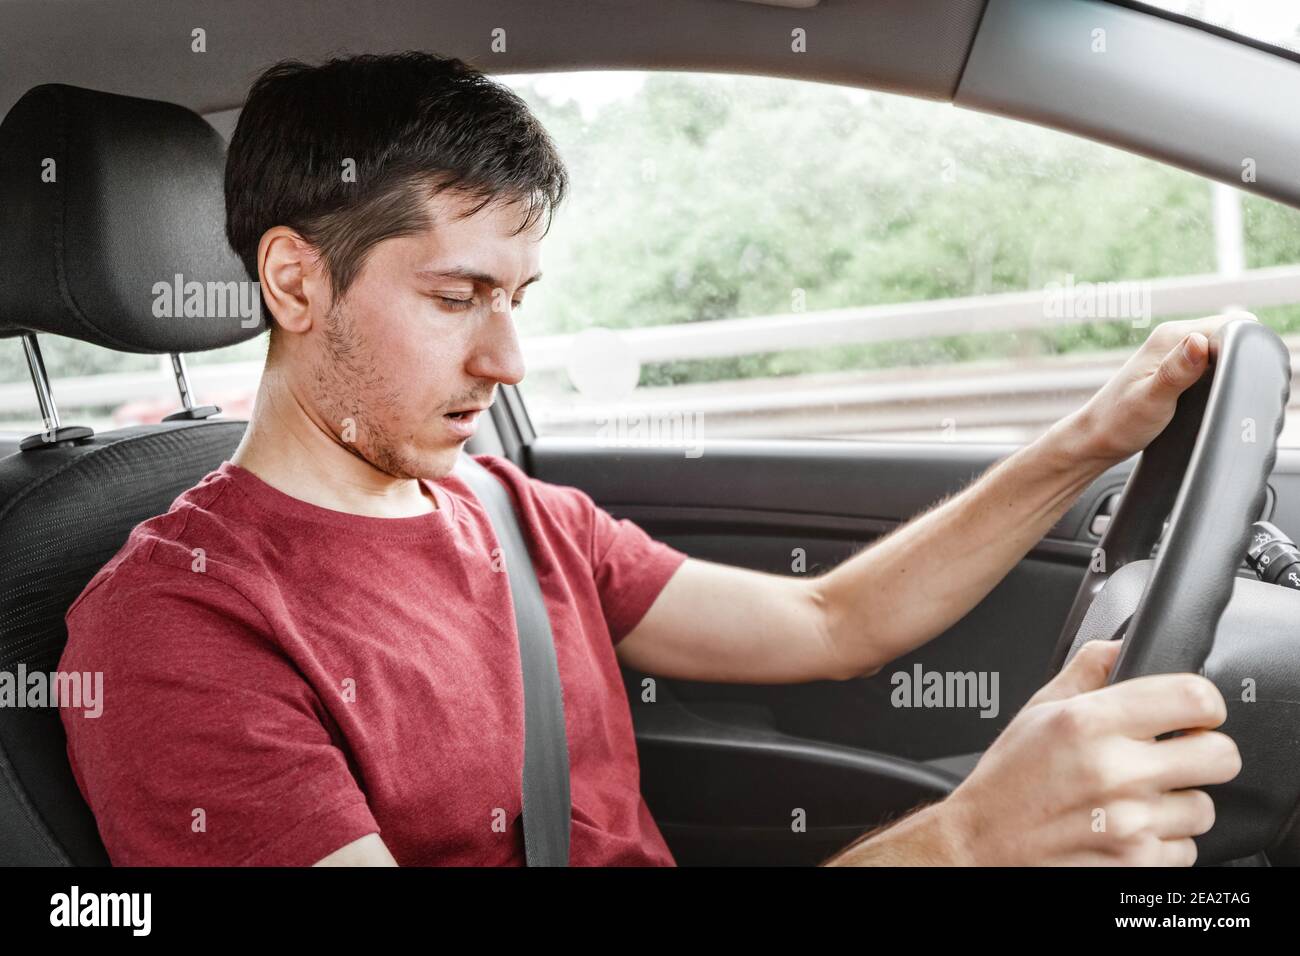 man driving the car fell asleep and does not control the road situation. Drugged with alcohol or insomnia concept. Car crashes and deaths Stock Photo